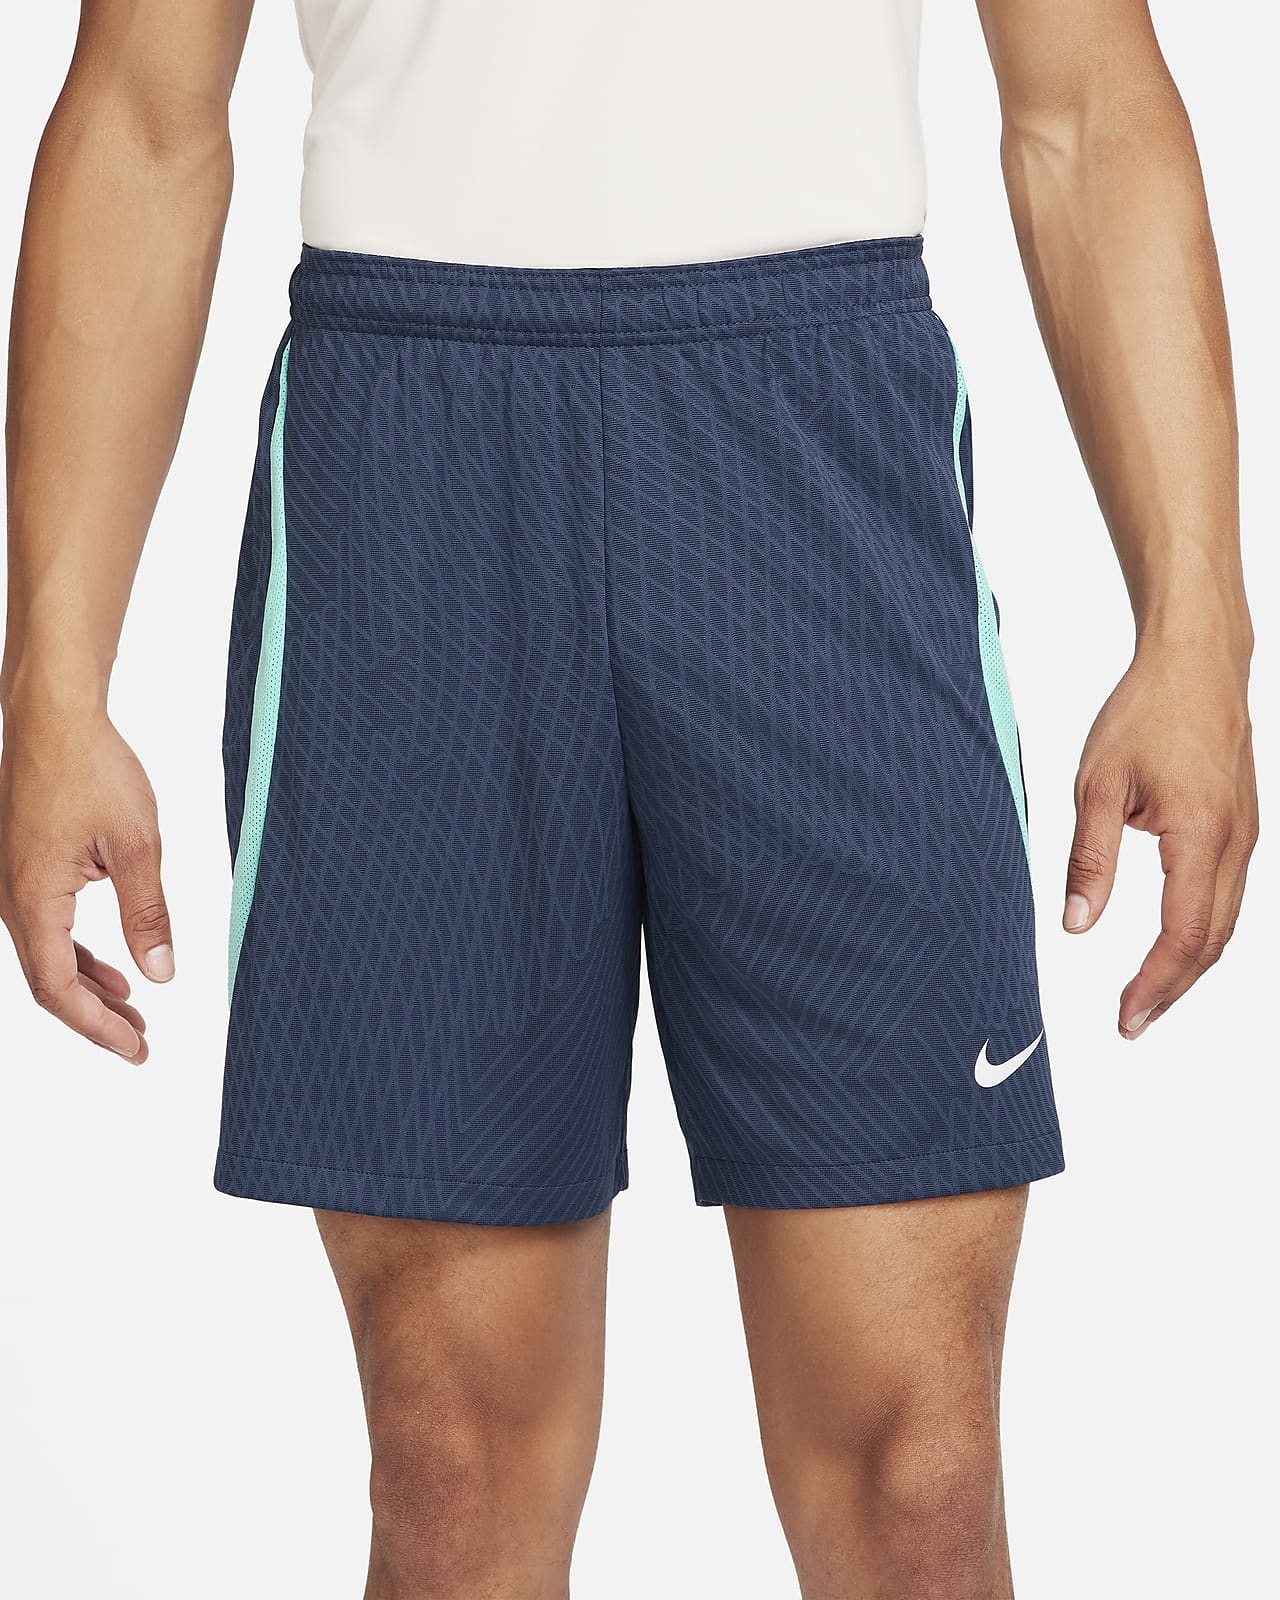 Nike Mens Two Tone Soccer Athletic Workout Shorts (#364399443769)